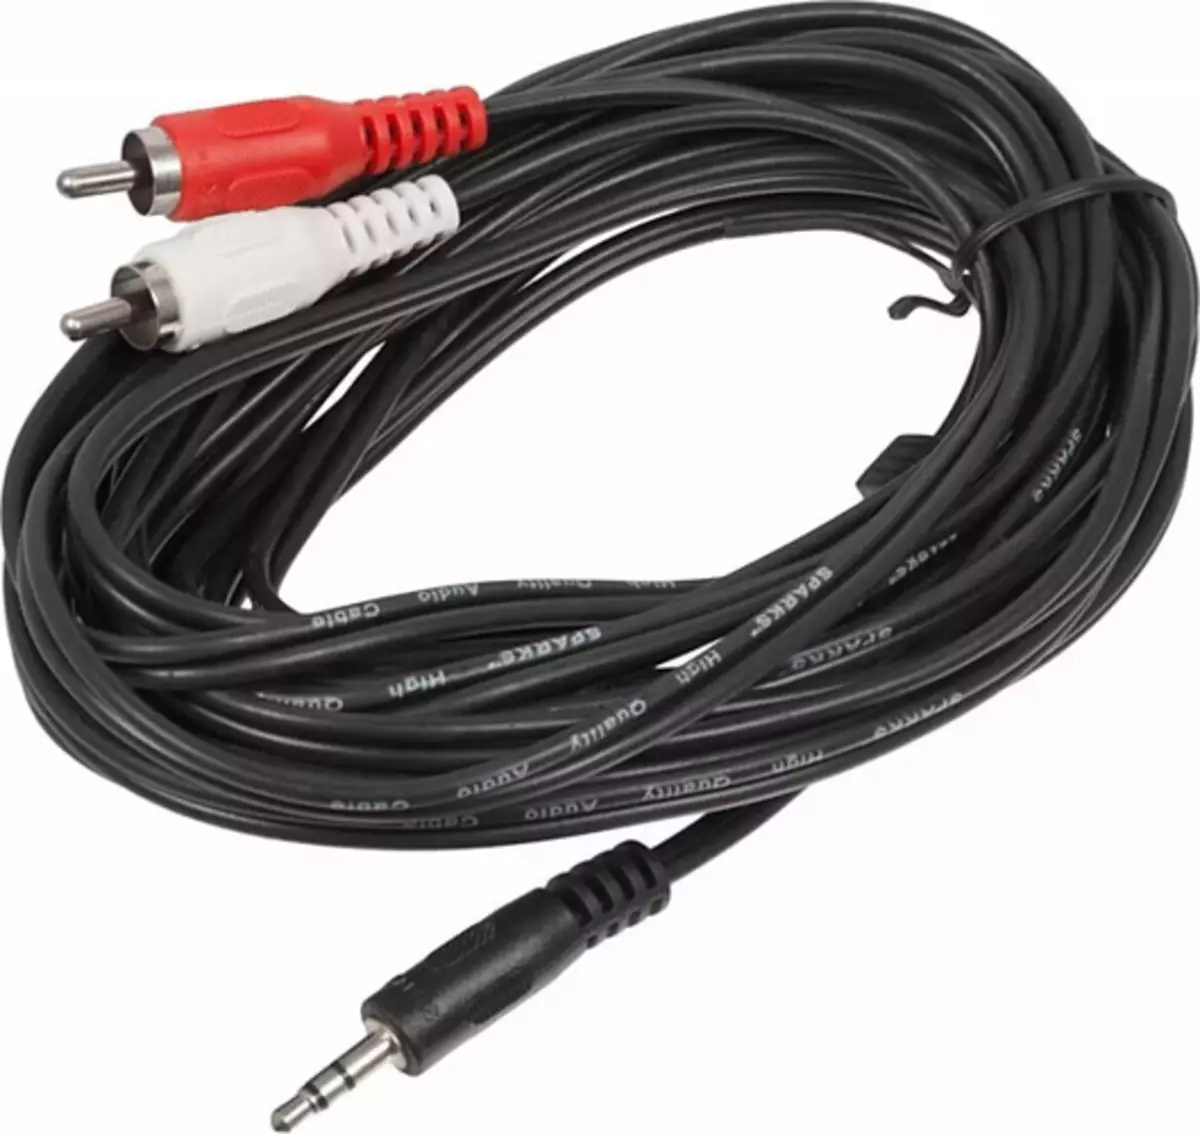 Cable Selection 3.5 mm Jack - RCA X2